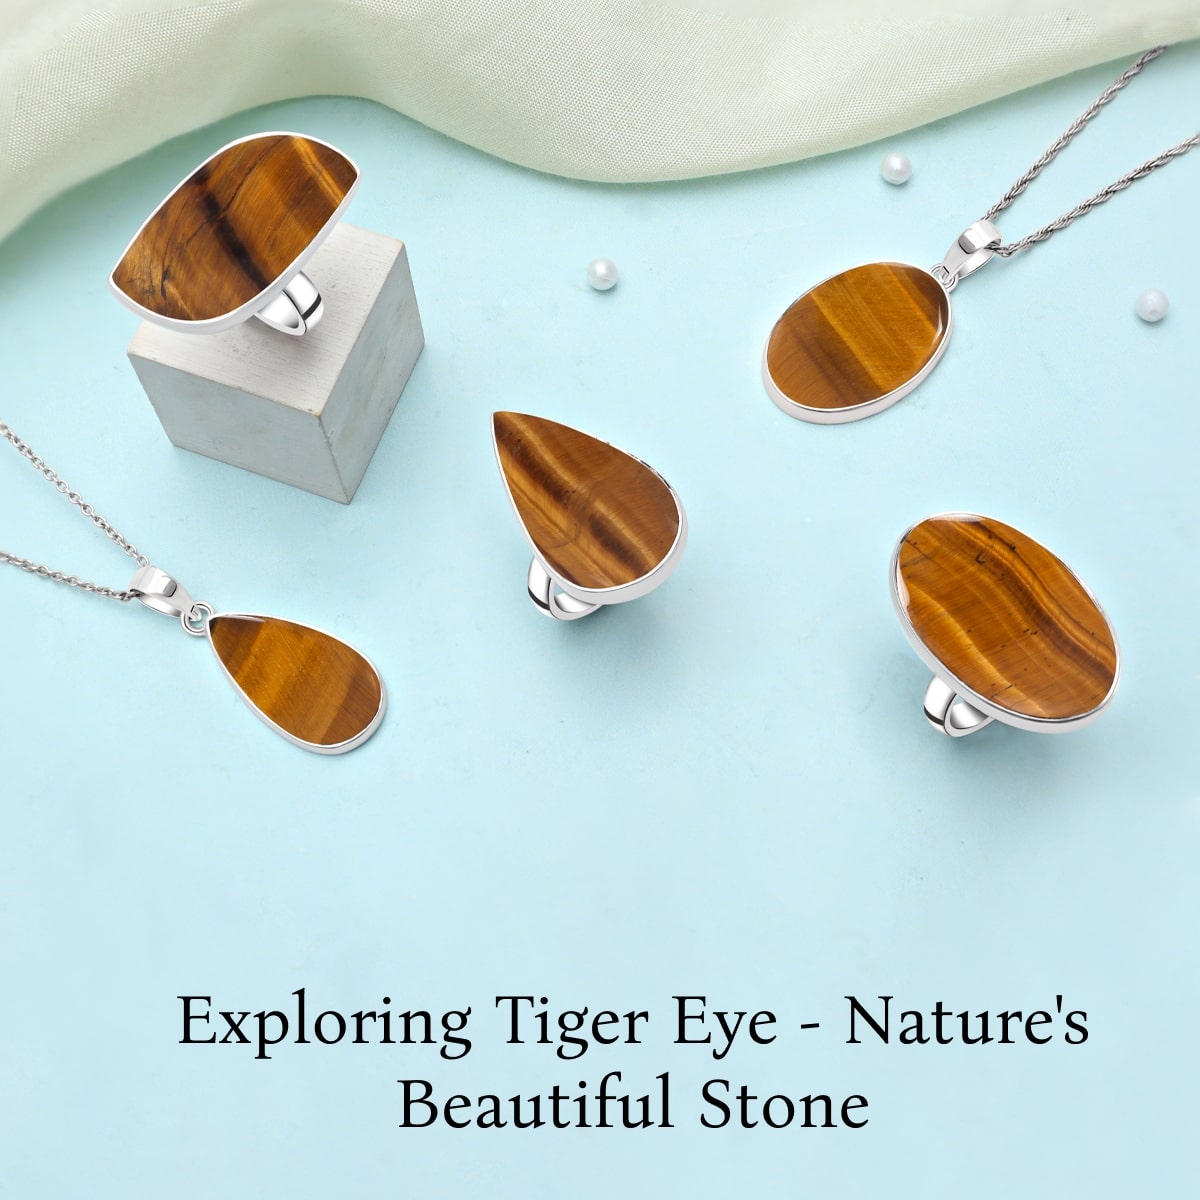 What is Tiger Eye